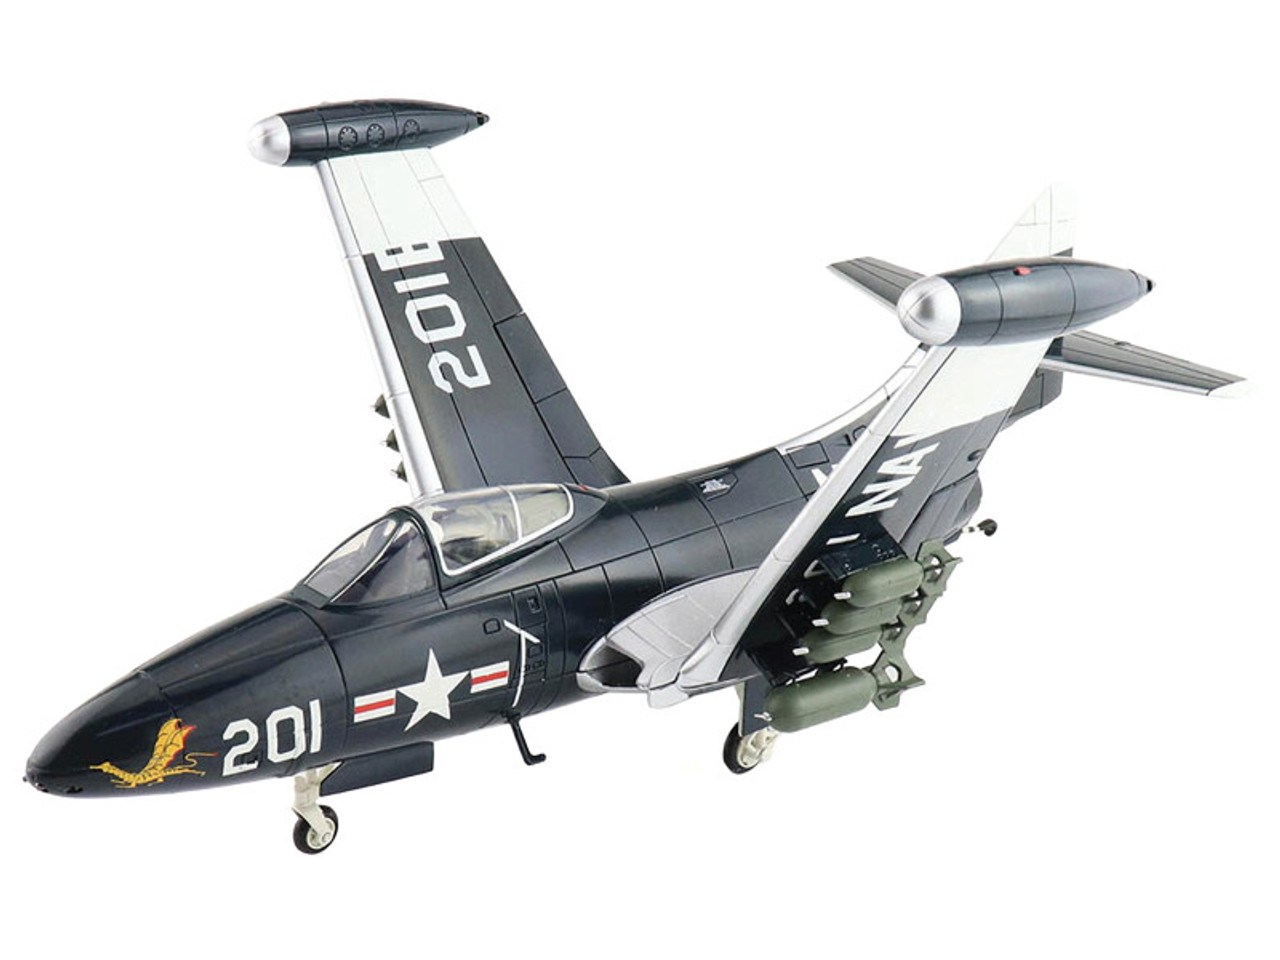 Grumman F9F-5 Panther Aircraft "VF-192 Golden Dragon USS Oriskany" United States Navy "Air Power Series" 1/48 Diecast Model by Hobby Master